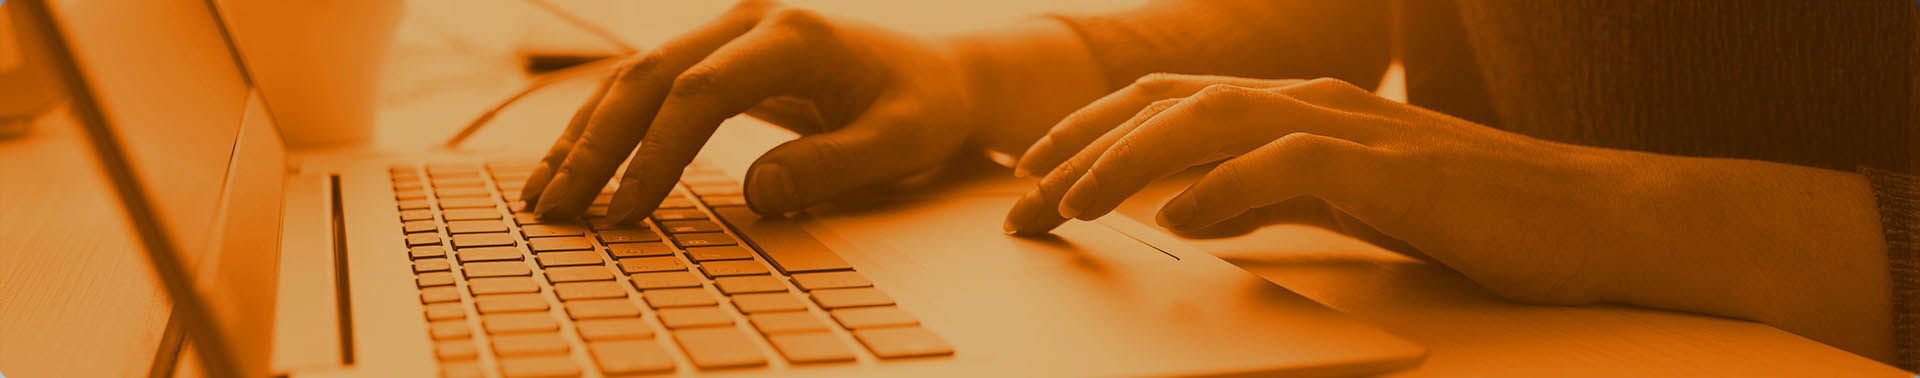 Hands shown typing on a laptop computer